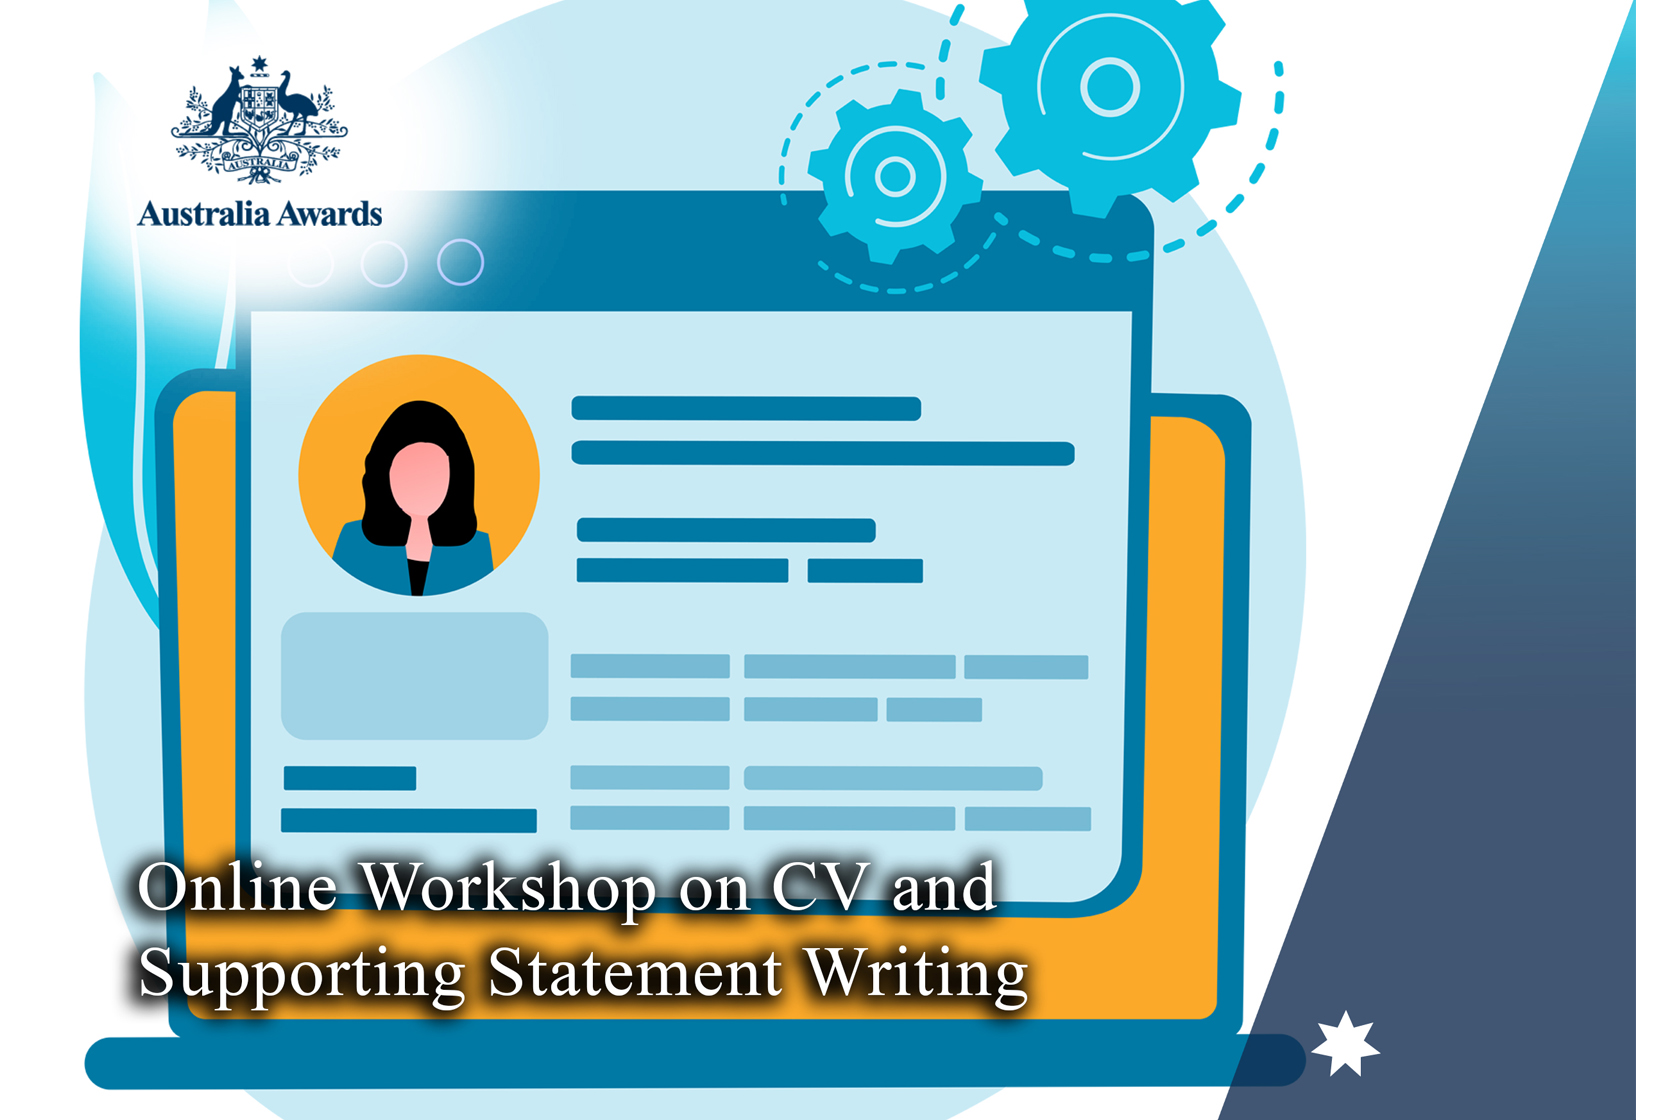 Online Workshop on CV and Supporting Statement Writing